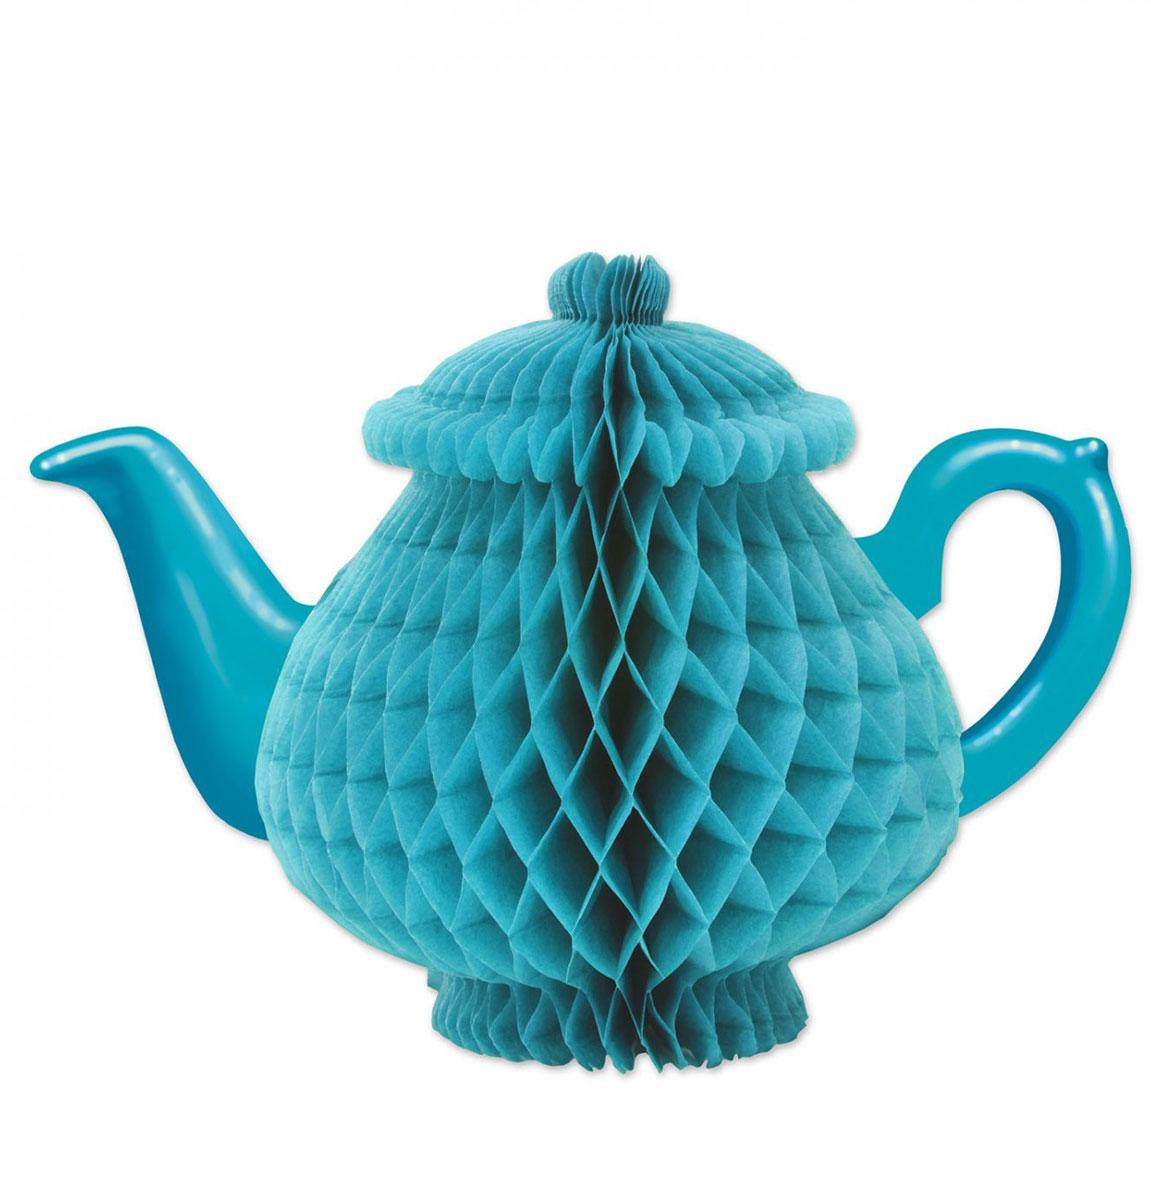 Honeycombe Tissue Teapot Tablecentre Decoration  7" tall by Beistle 59947 available in the UK here at Karnival Costumes online party shop